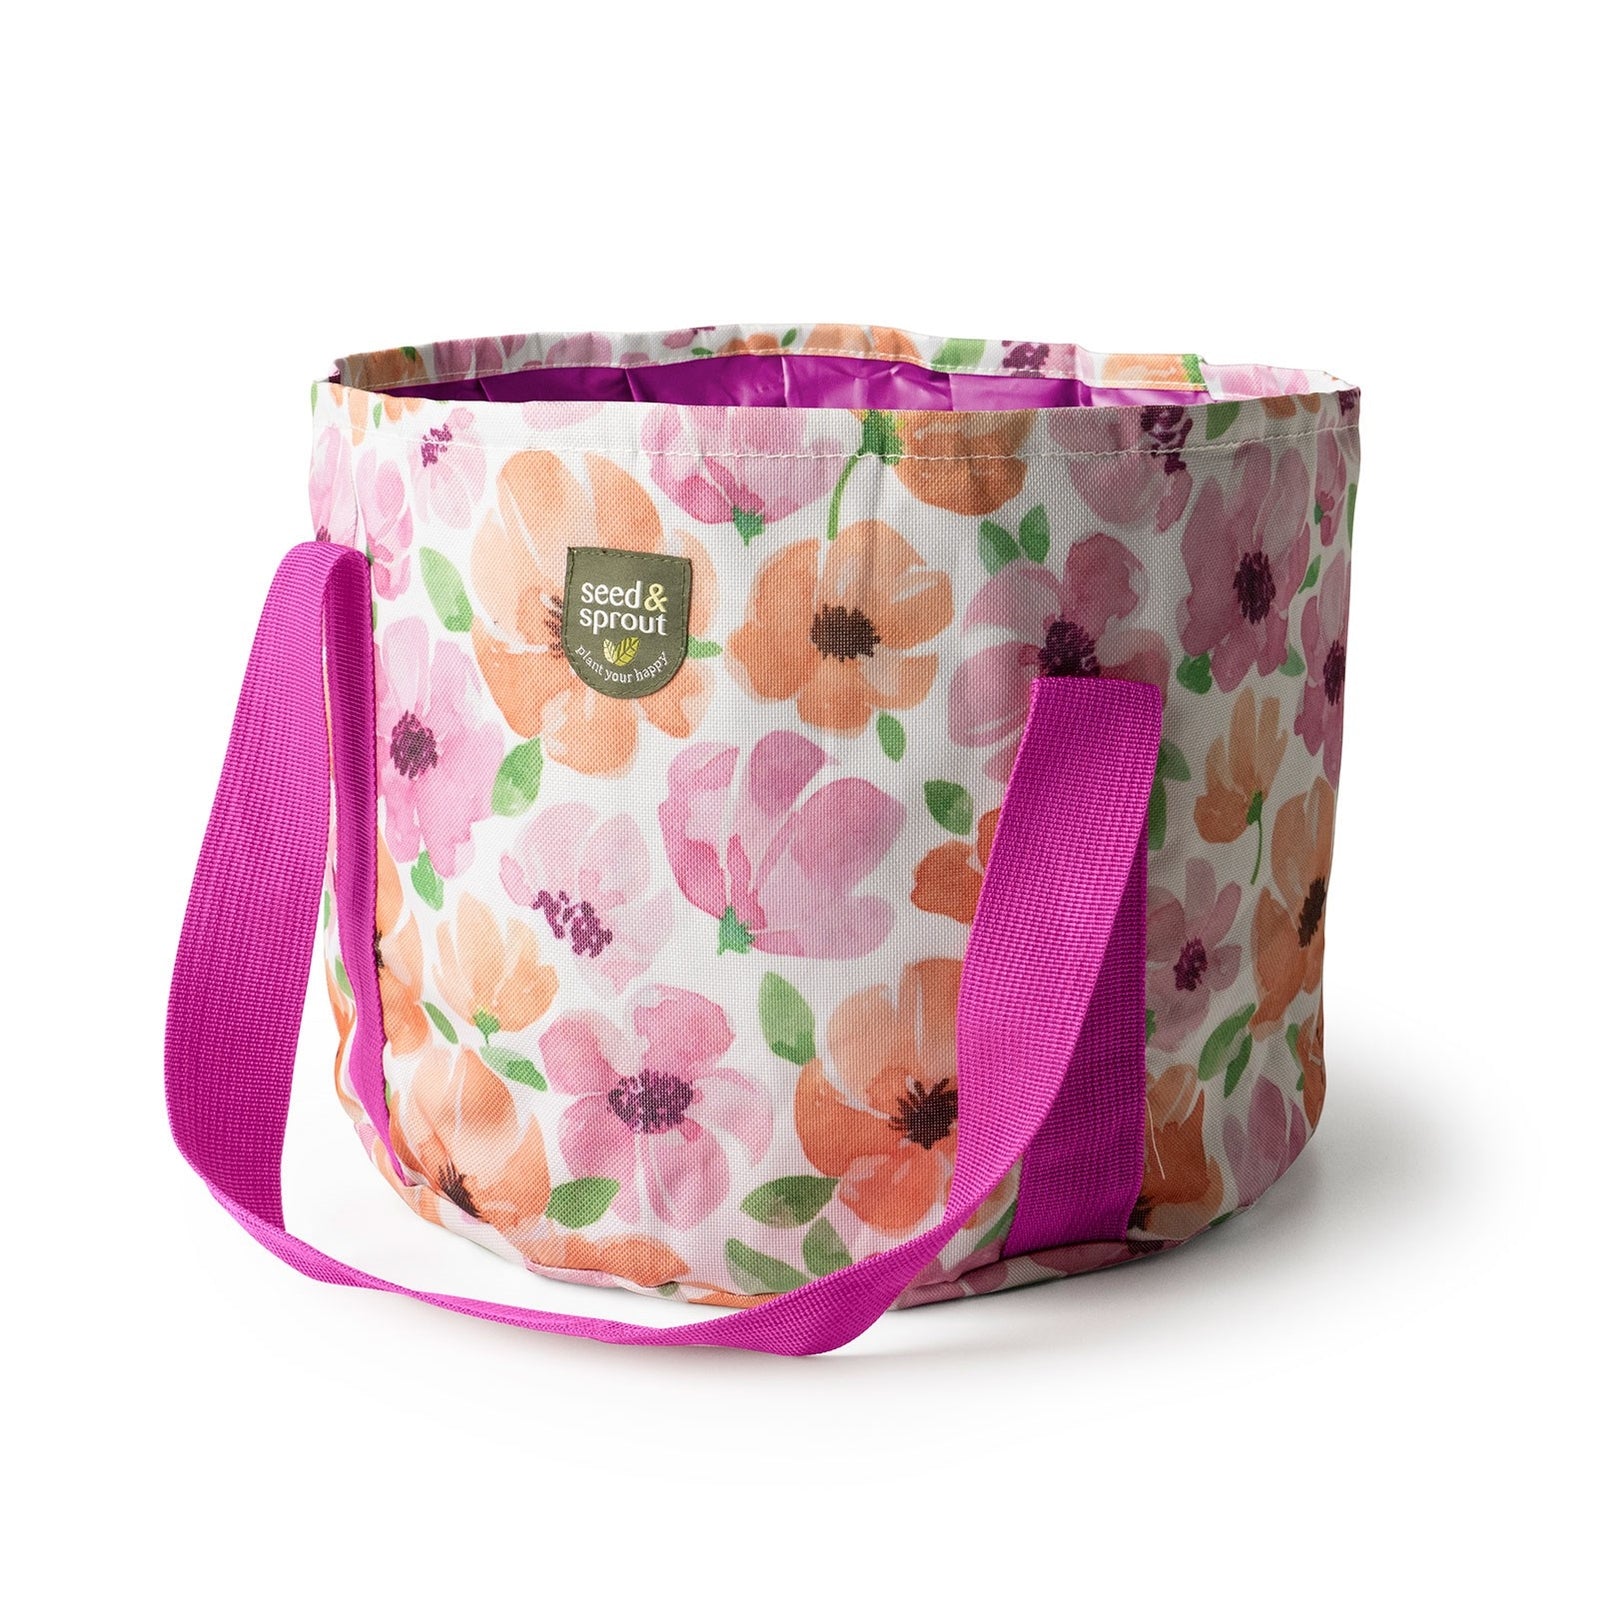 Seed & Sprout Foldable Gardening Bucket - FINAL SALE